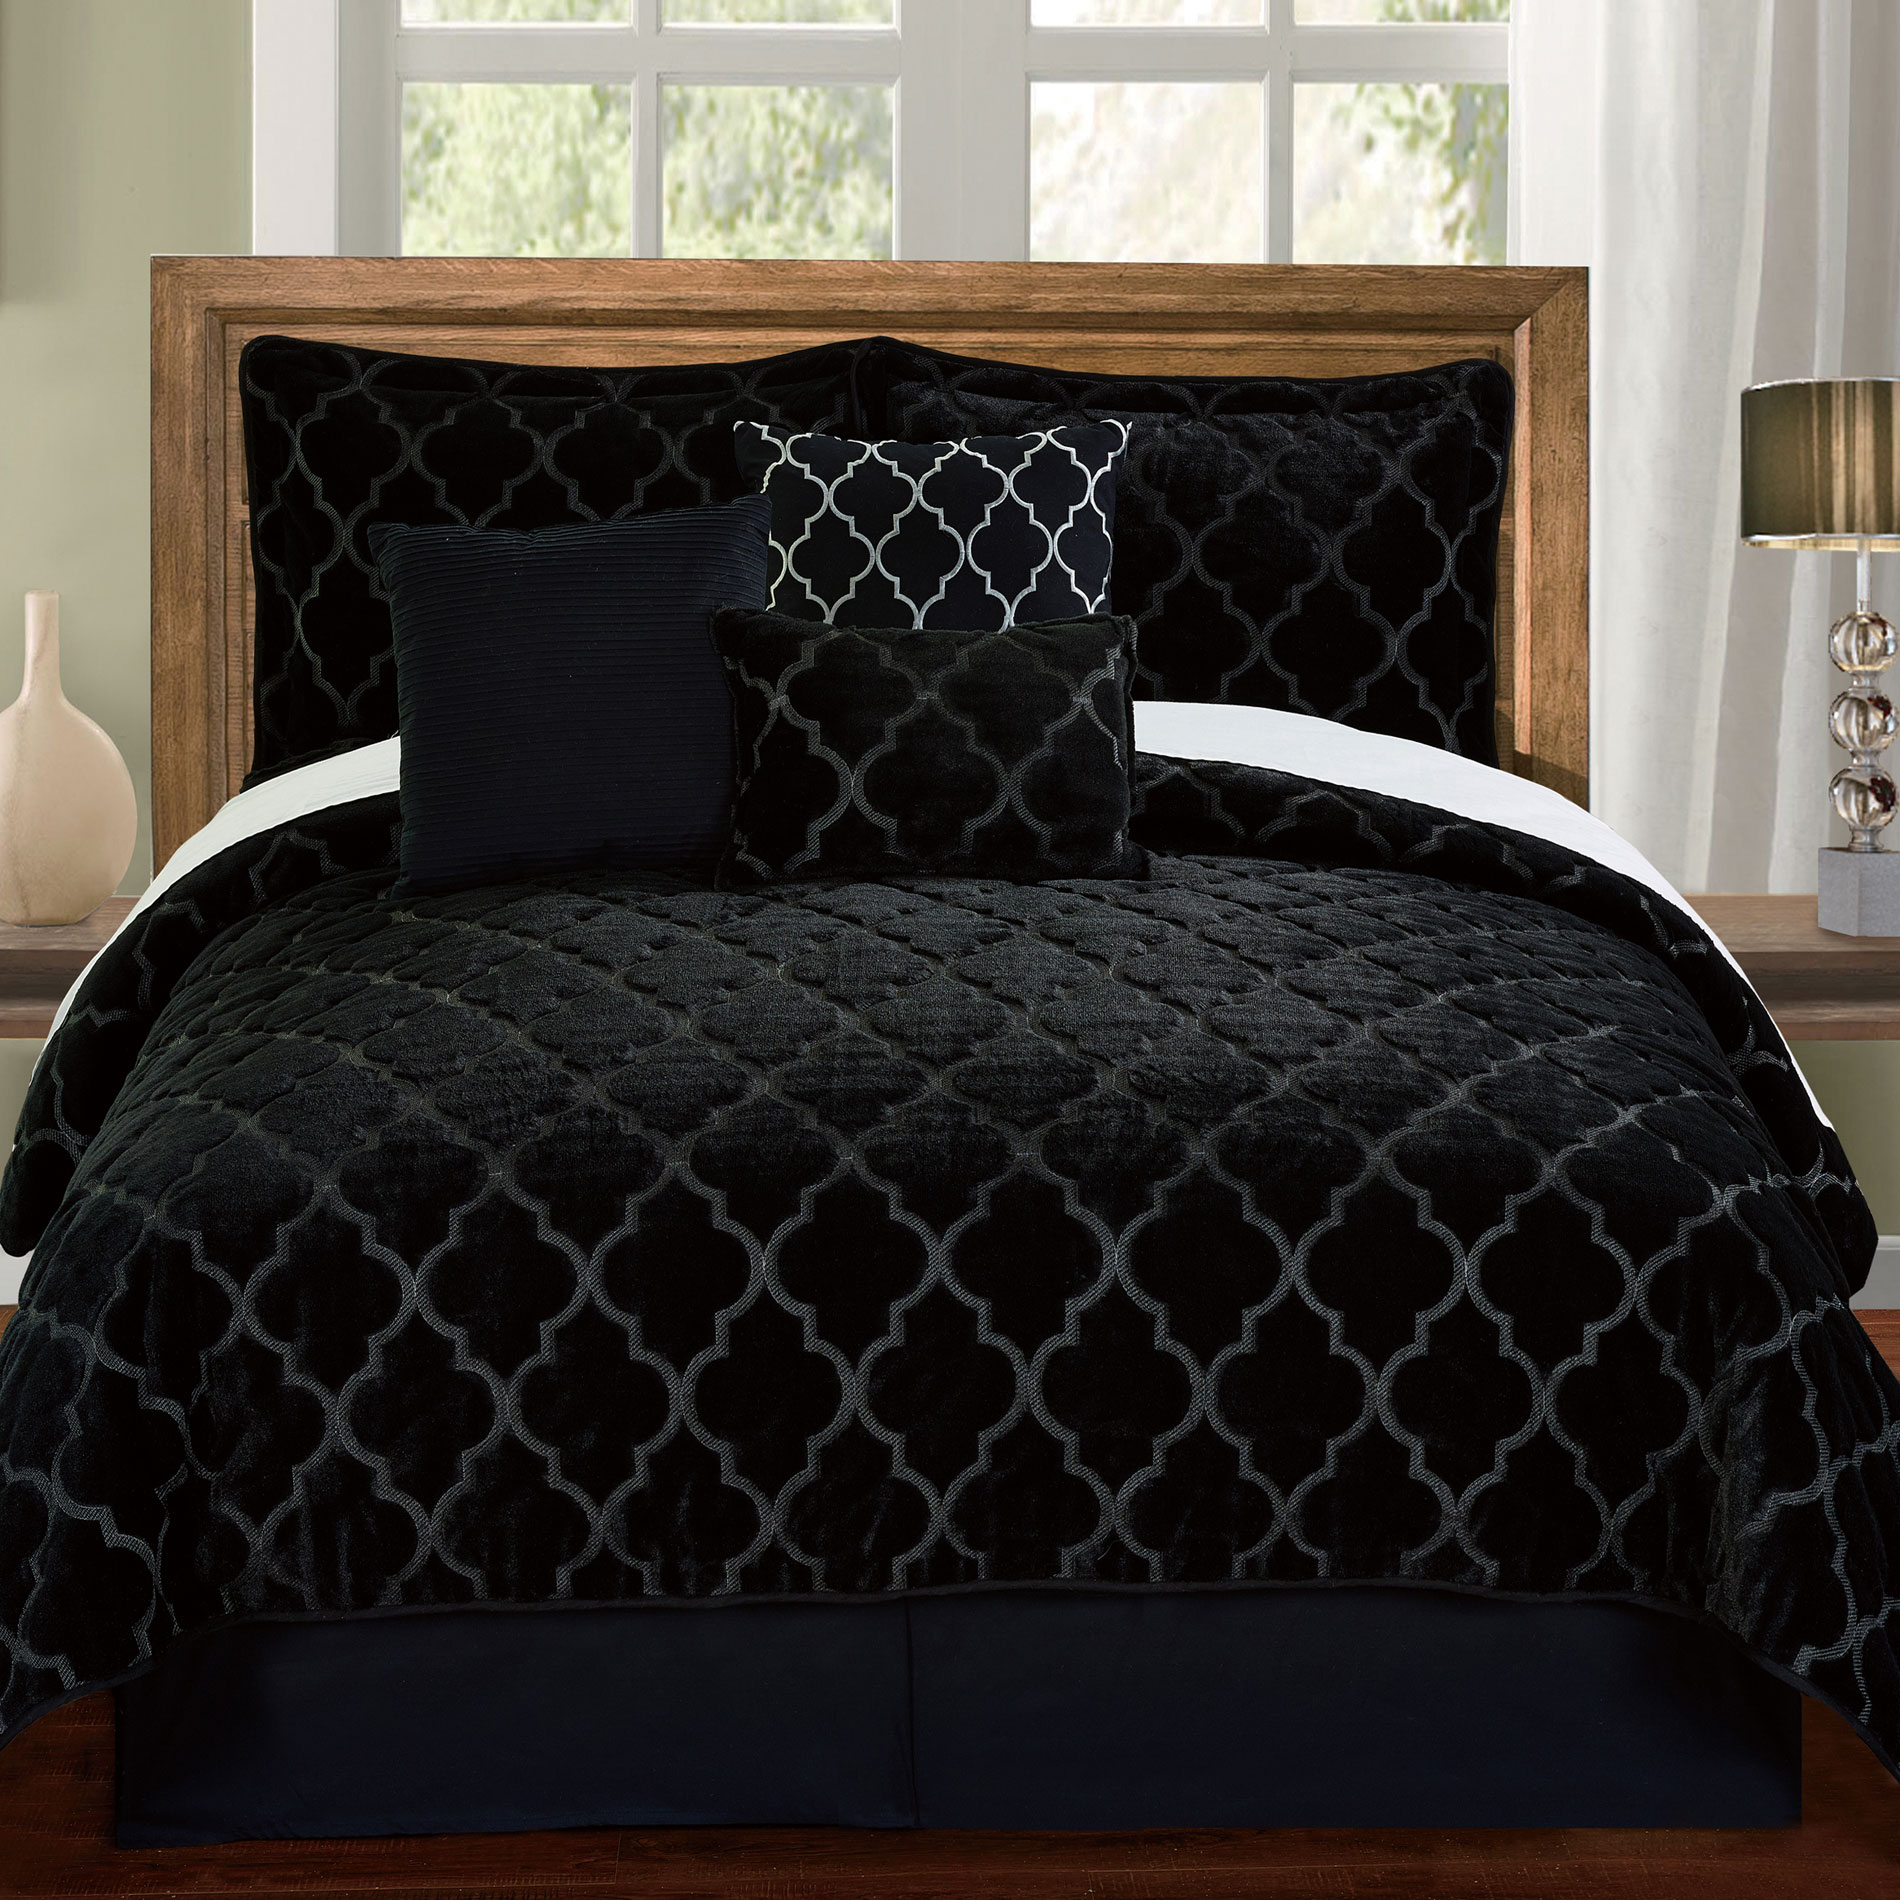 Serenta Ogee Faux Fur Embroidered 7 Piece Bed Spread Set